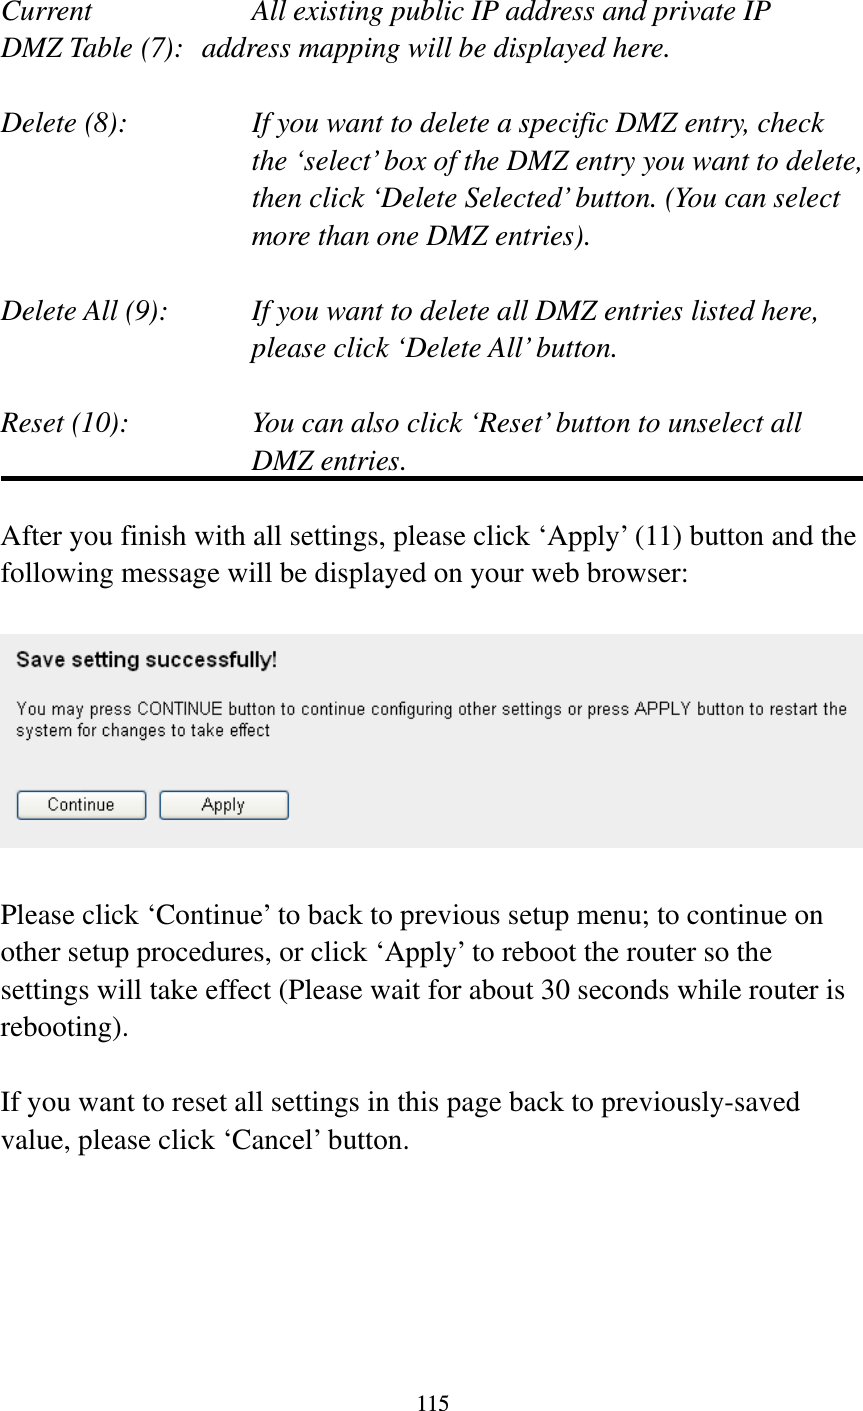 115   Current        All existing public IP address and private IP DMZ Table (7):   address mapping will be displayed here.  Delete (8):      If you want to delete a specific DMZ entry, check     the ‘select’ box of the DMZ entry you want to delete, then click ‘Delete Selected’ button. (You can select more than one DMZ entries).  Delete All (9):    If you want to delete all DMZ entries listed here, please click ‘Delete All’ button.  Reset (10):    You can also click ‘Reset’ button to unselect all DMZ entries.  After you finish with all settings, please click ‘Apply’ (11) button and the following message will be displayed on your web browser:    Please click ‘Continue’ to back to previous setup menu; to continue on other setup procedures, or click ‘Apply’ to reboot the router so the settings will take effect (Please wait for about 30 seconds while router is rebooting).  If you want to reset all settings in this page back to previously-saved value, please click ‘Cancel’ button.      